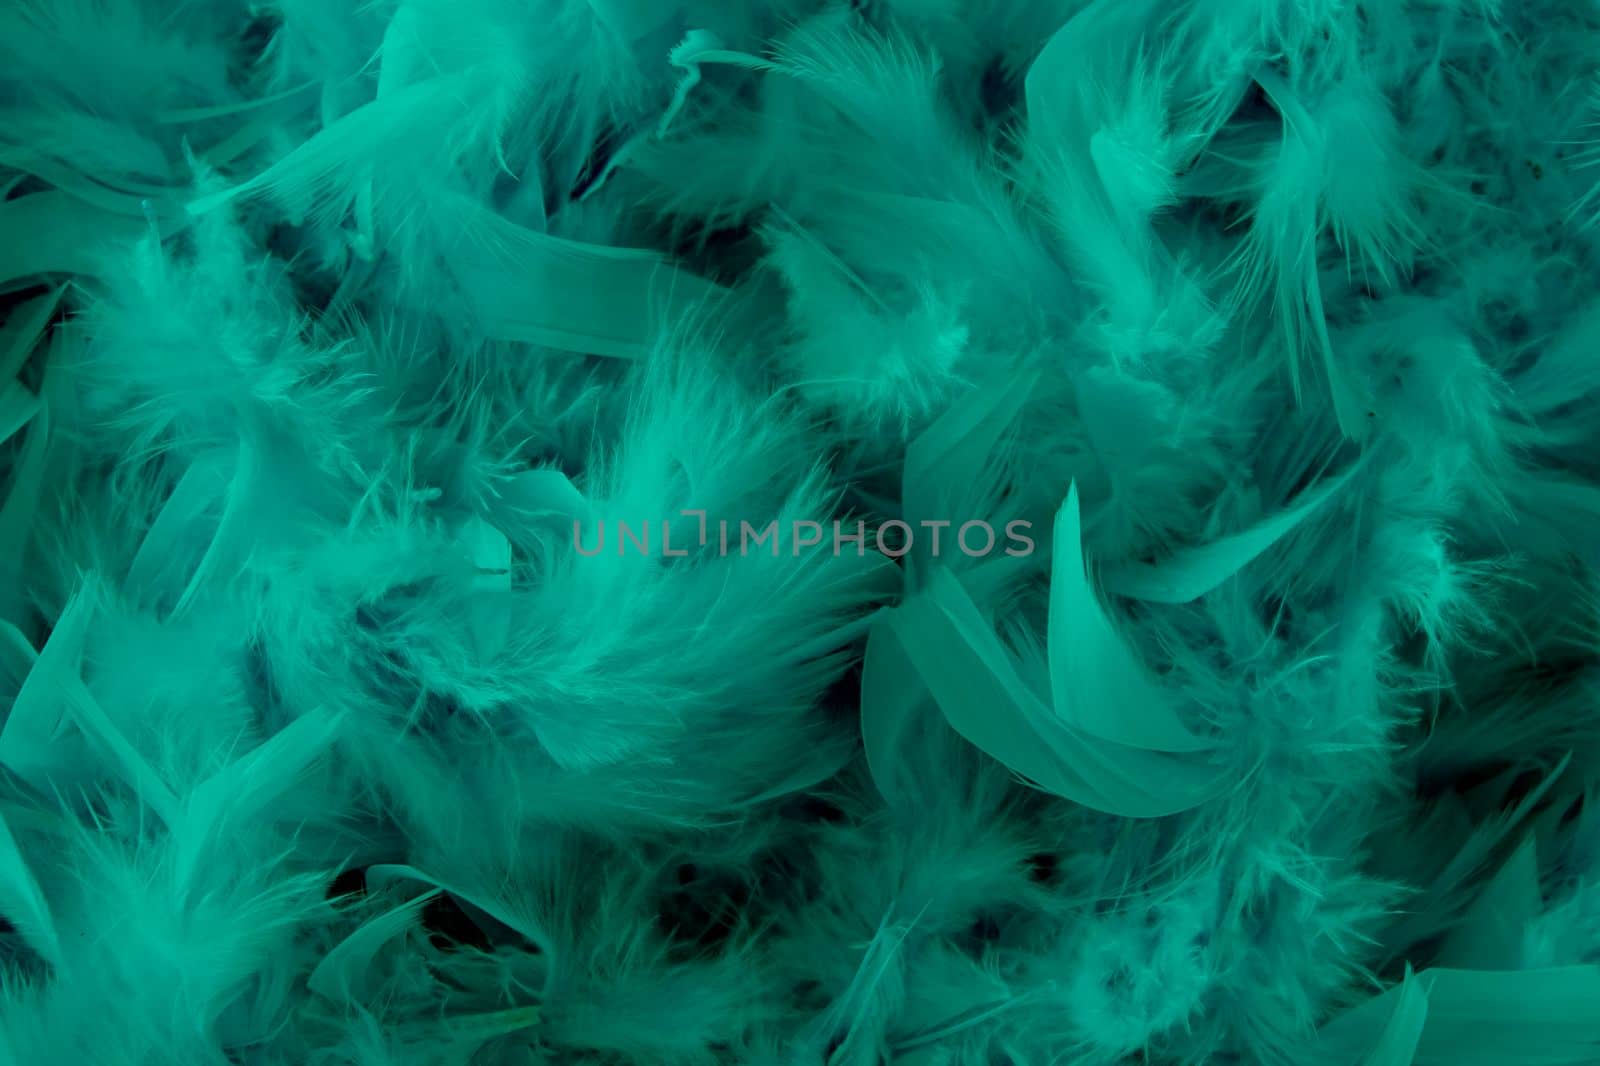 background of turquoise feathers beautiful tactile soft surfaces and texture by KaterinaDalemans